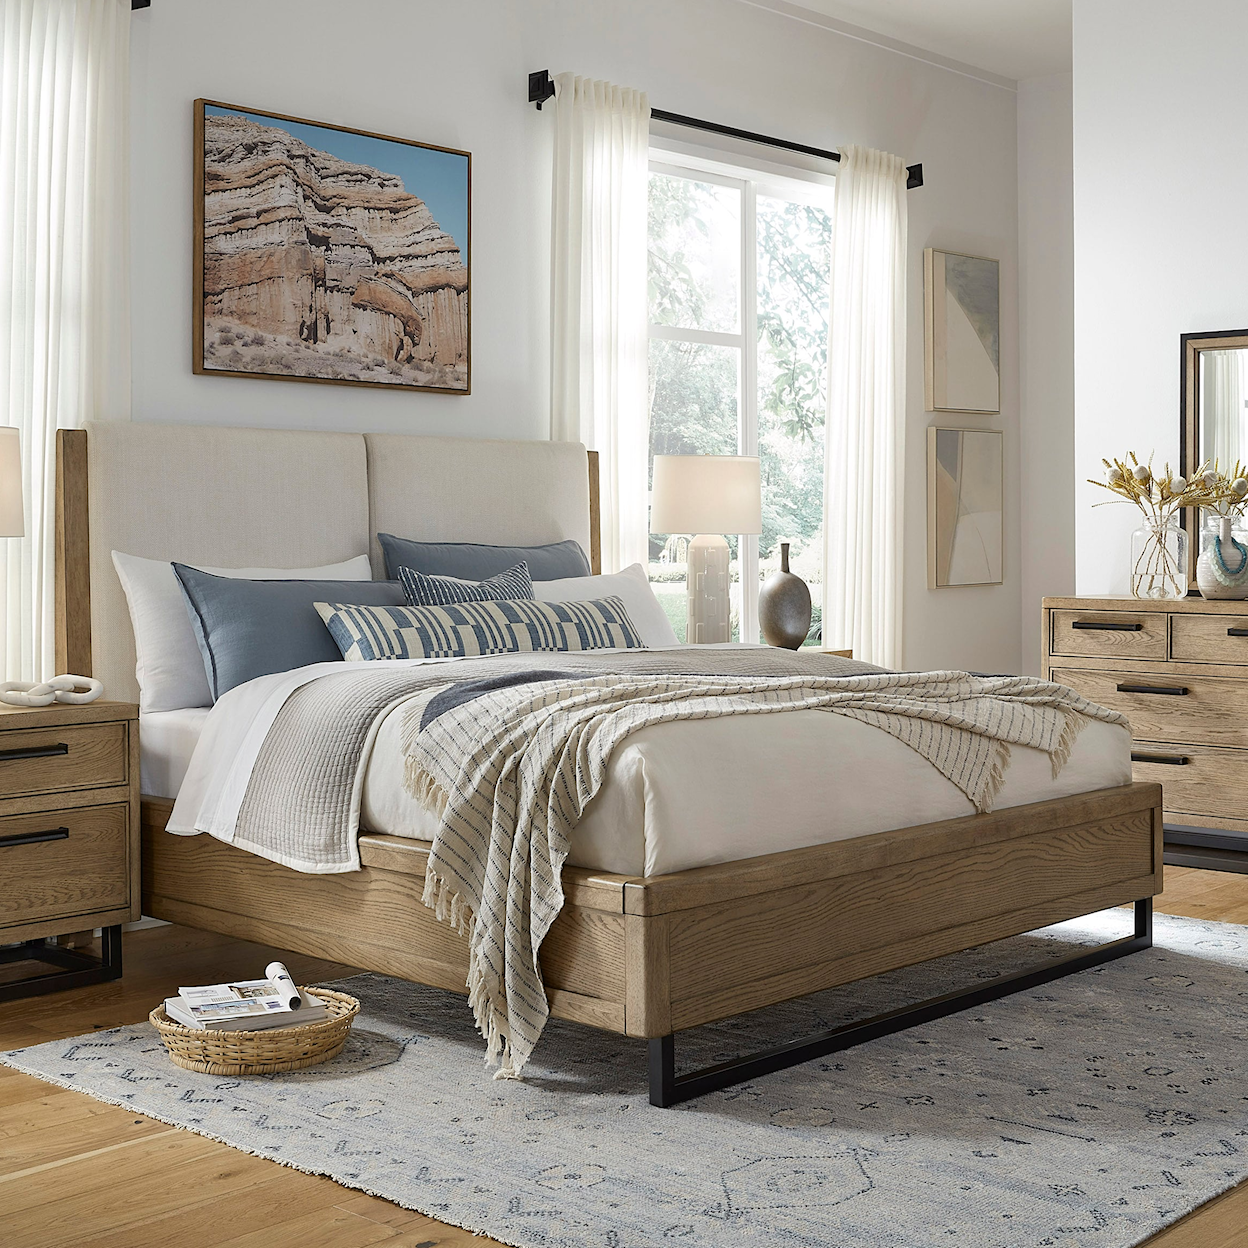 Drew & Jonathan Home Catalina Catalina Queen Upholstered Bed